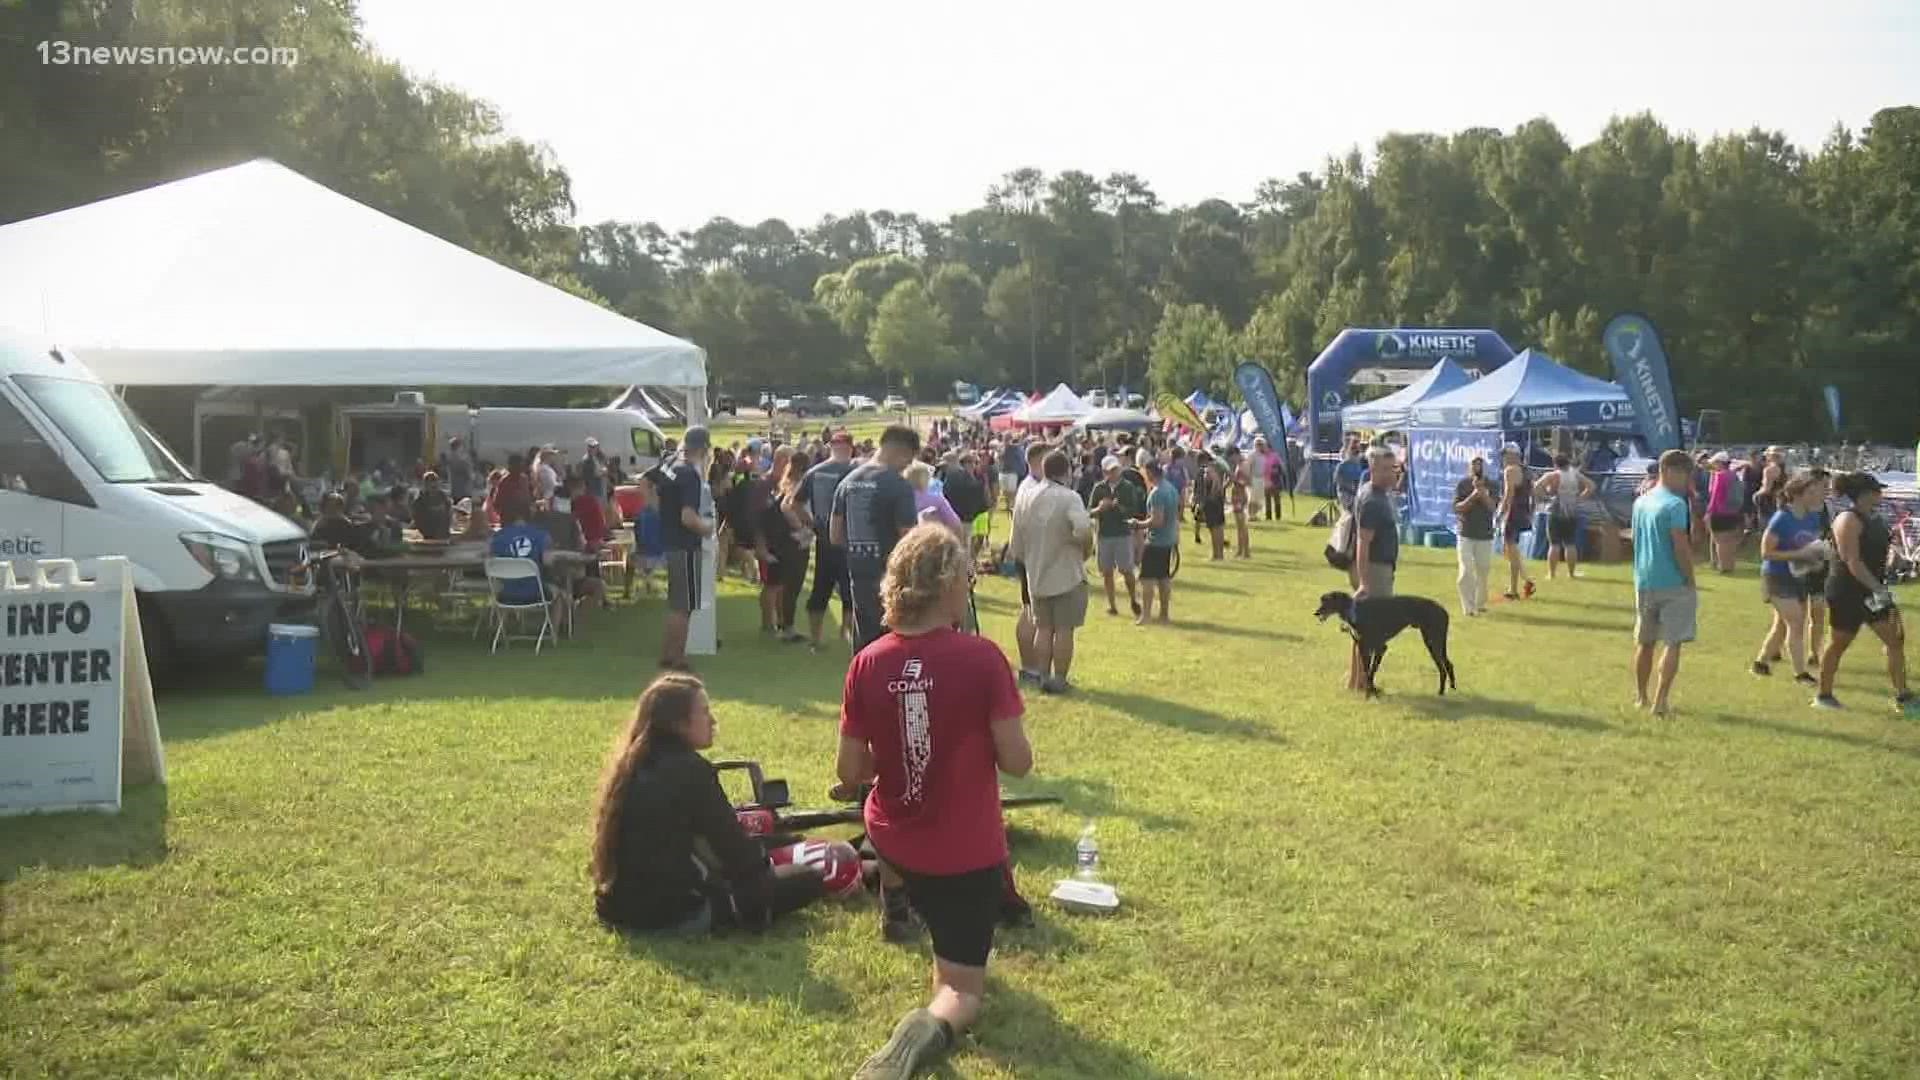 This weekend, around 1,200 people swam, biked and ran in the Patriots Triathlon.